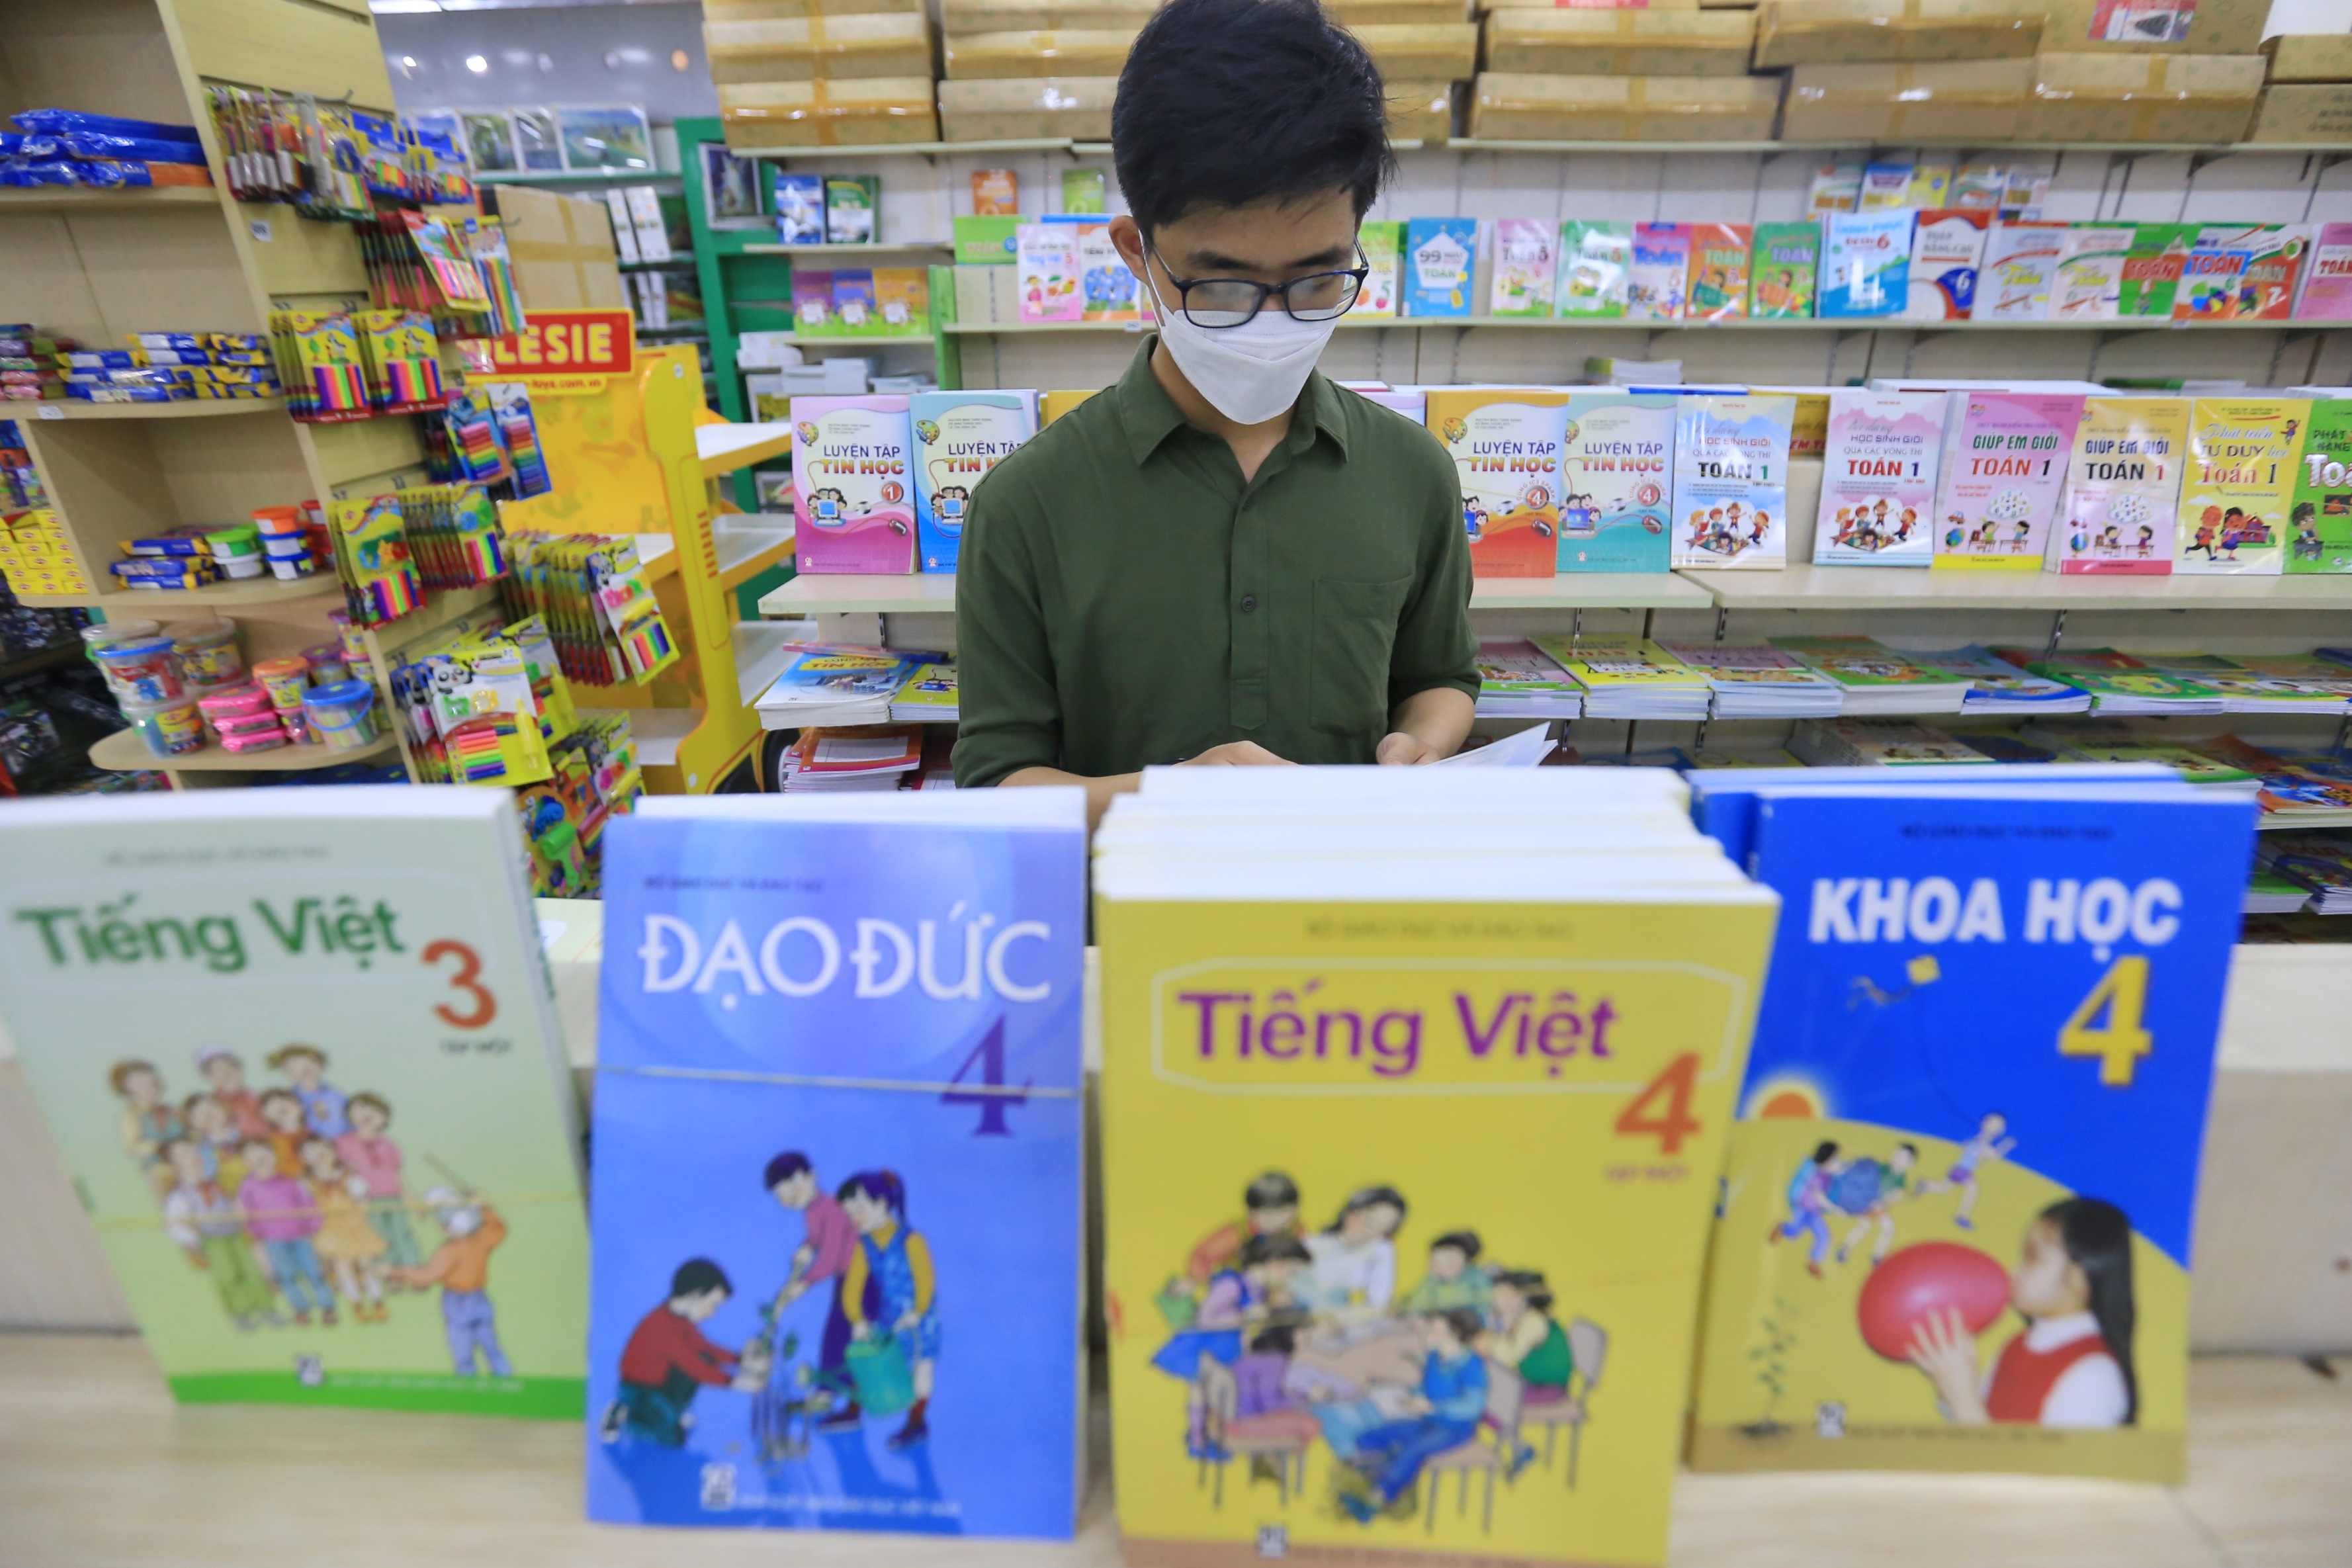 Amendments to regulations on textbook selection in Vietnam specified in Circular 25/2020/TT-BGDDT